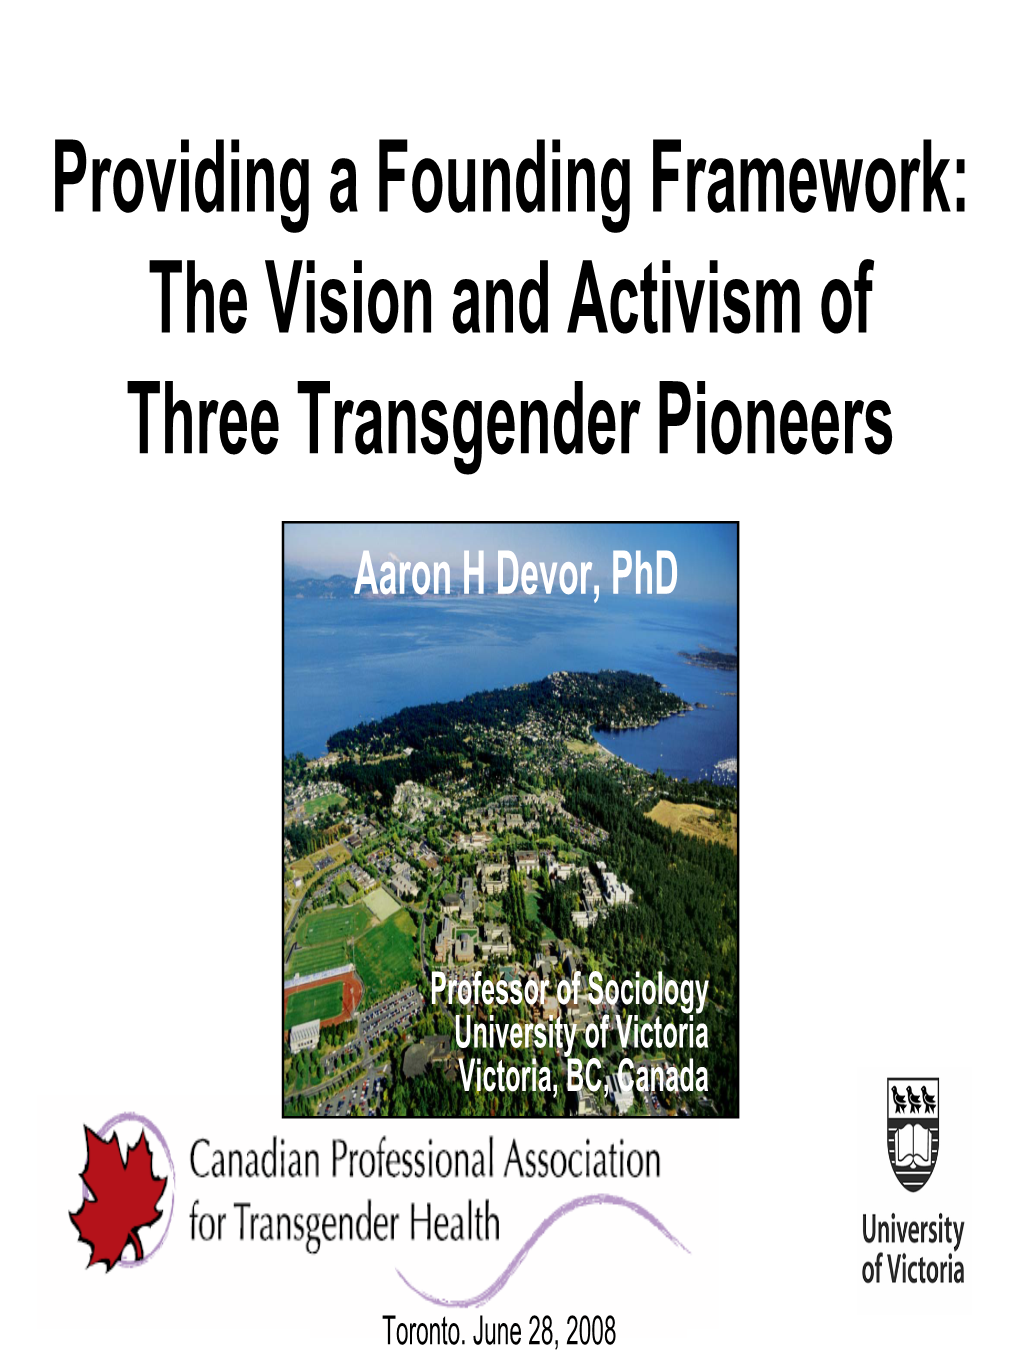 Providing a Founding Framework: the Vision and Activism of Three Transgender Pioneers